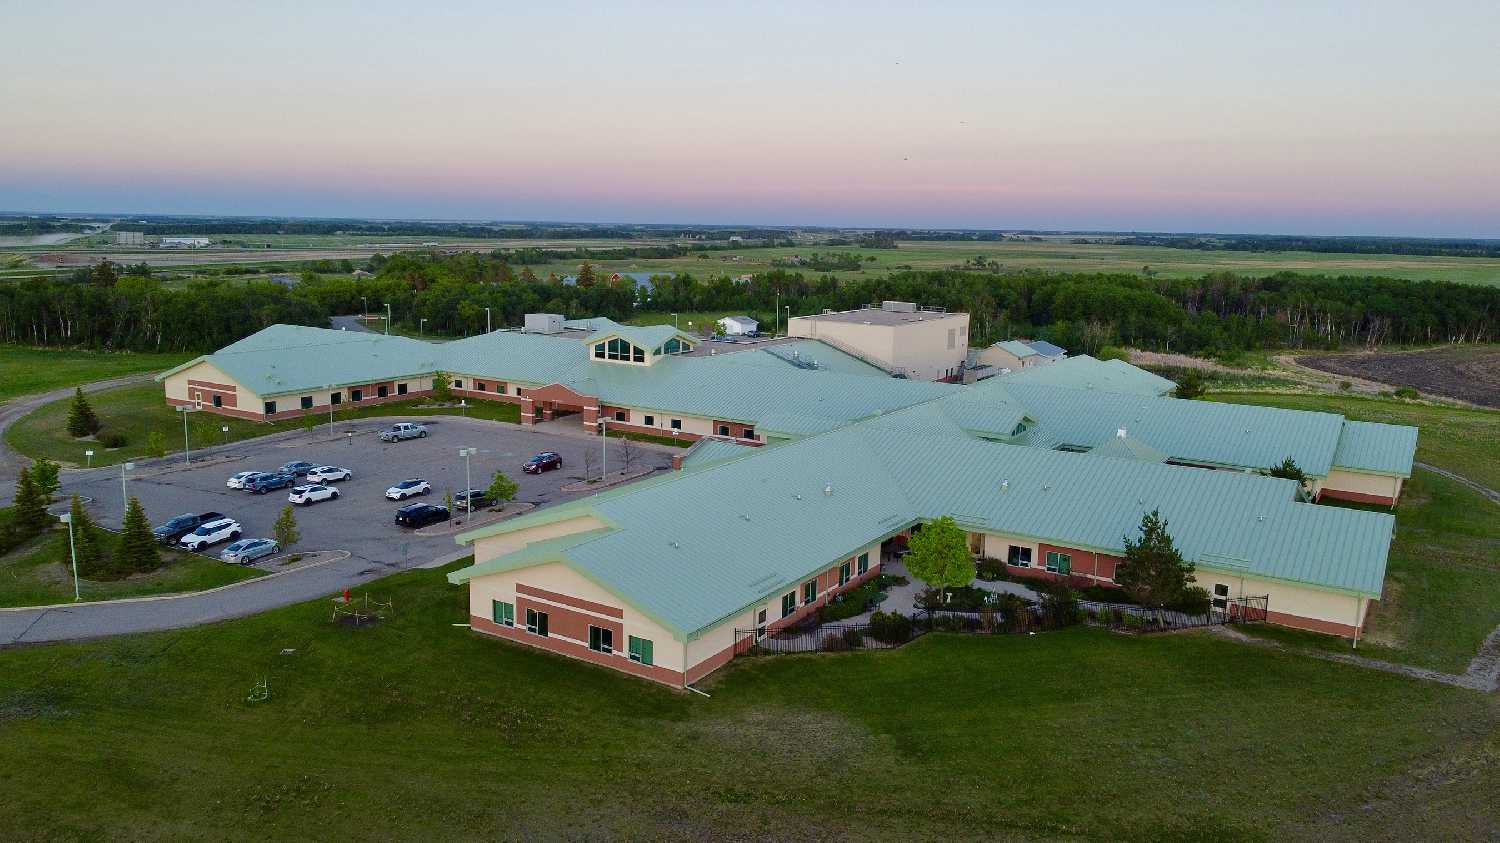 The Southeast Integrated Care Centre in Moosomin. The Southeast Family Medicine Residency Program and the push for a CT Scanner for Moosomin are two of the projects under way that will help take the area to the next level. Editor Kevin Weedmark took this drone shot of the care centre.